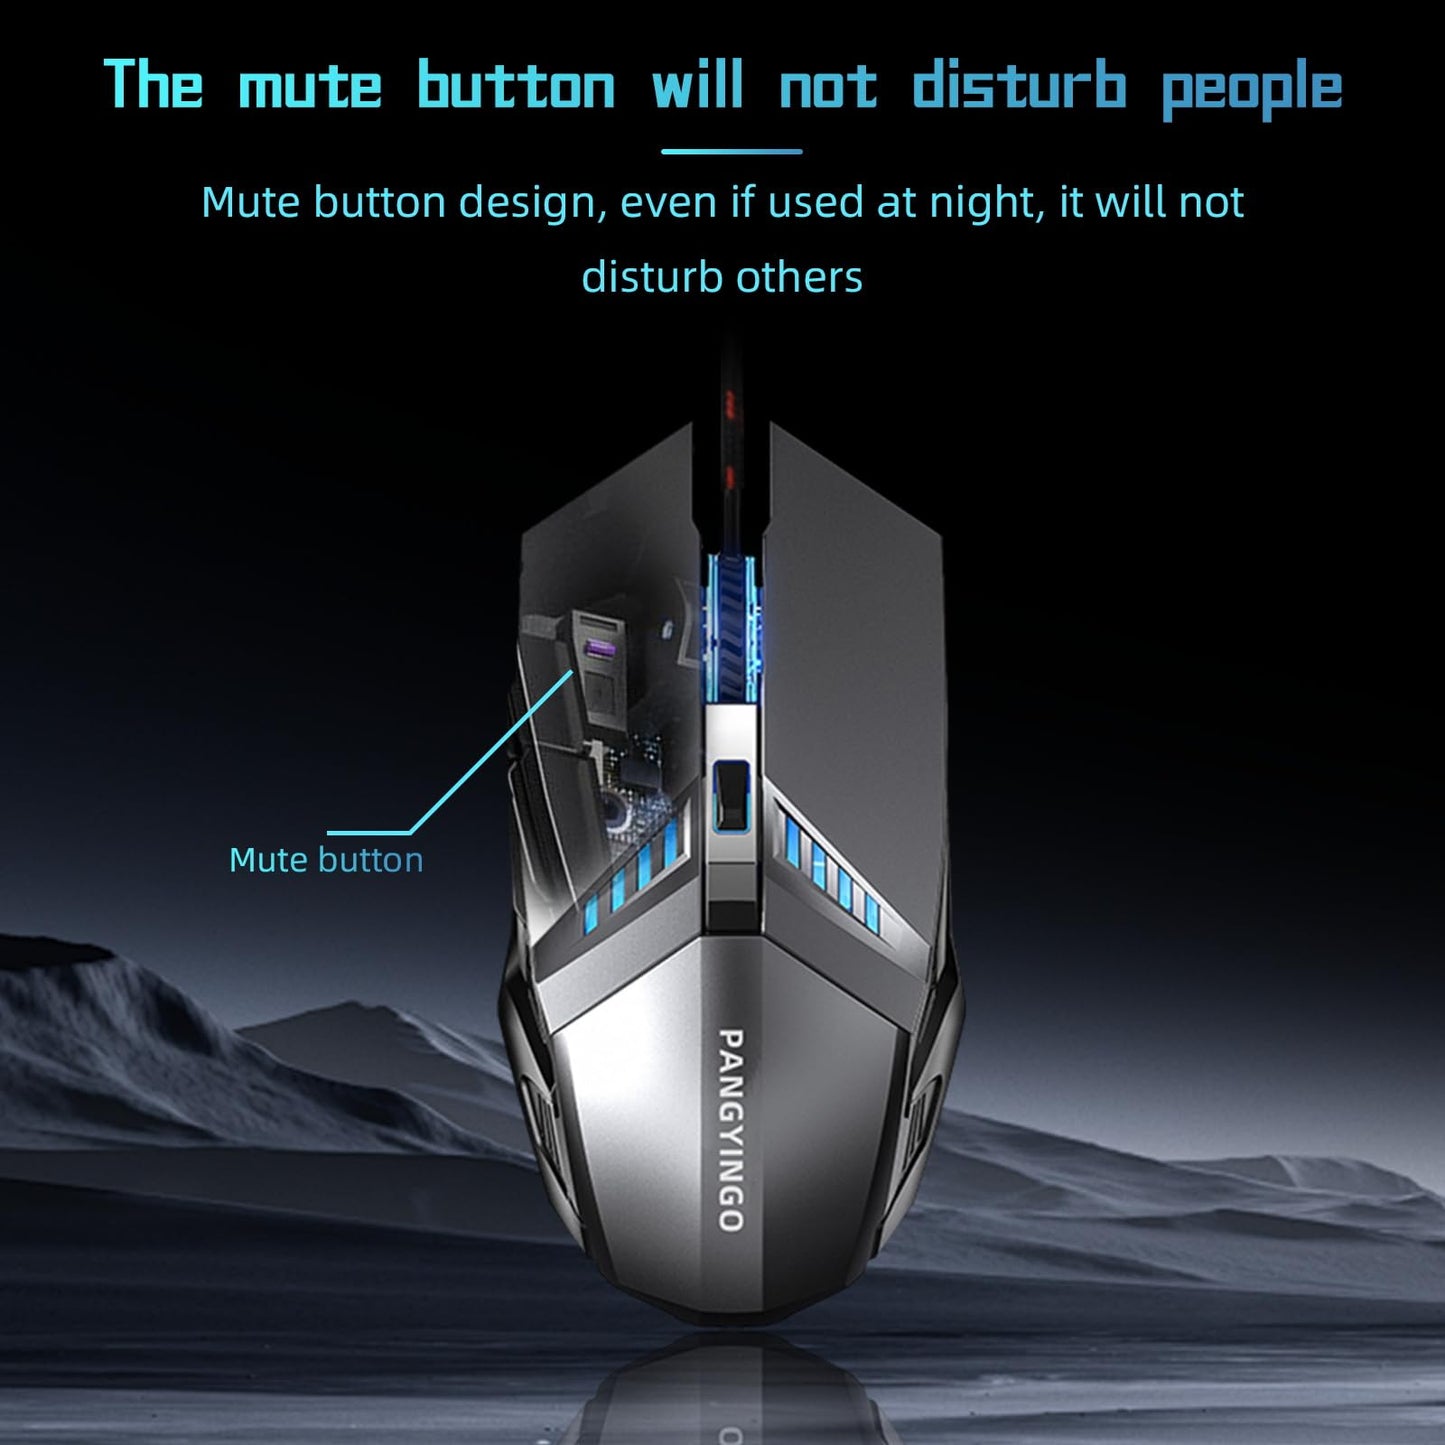 ONE-UP Wired Gaming Mouse Silent Design, Three DPI Levels, RGB Backlighting, 6 Buttons, Ergonomic Design, for Windows/Mac/Laptops, Grey